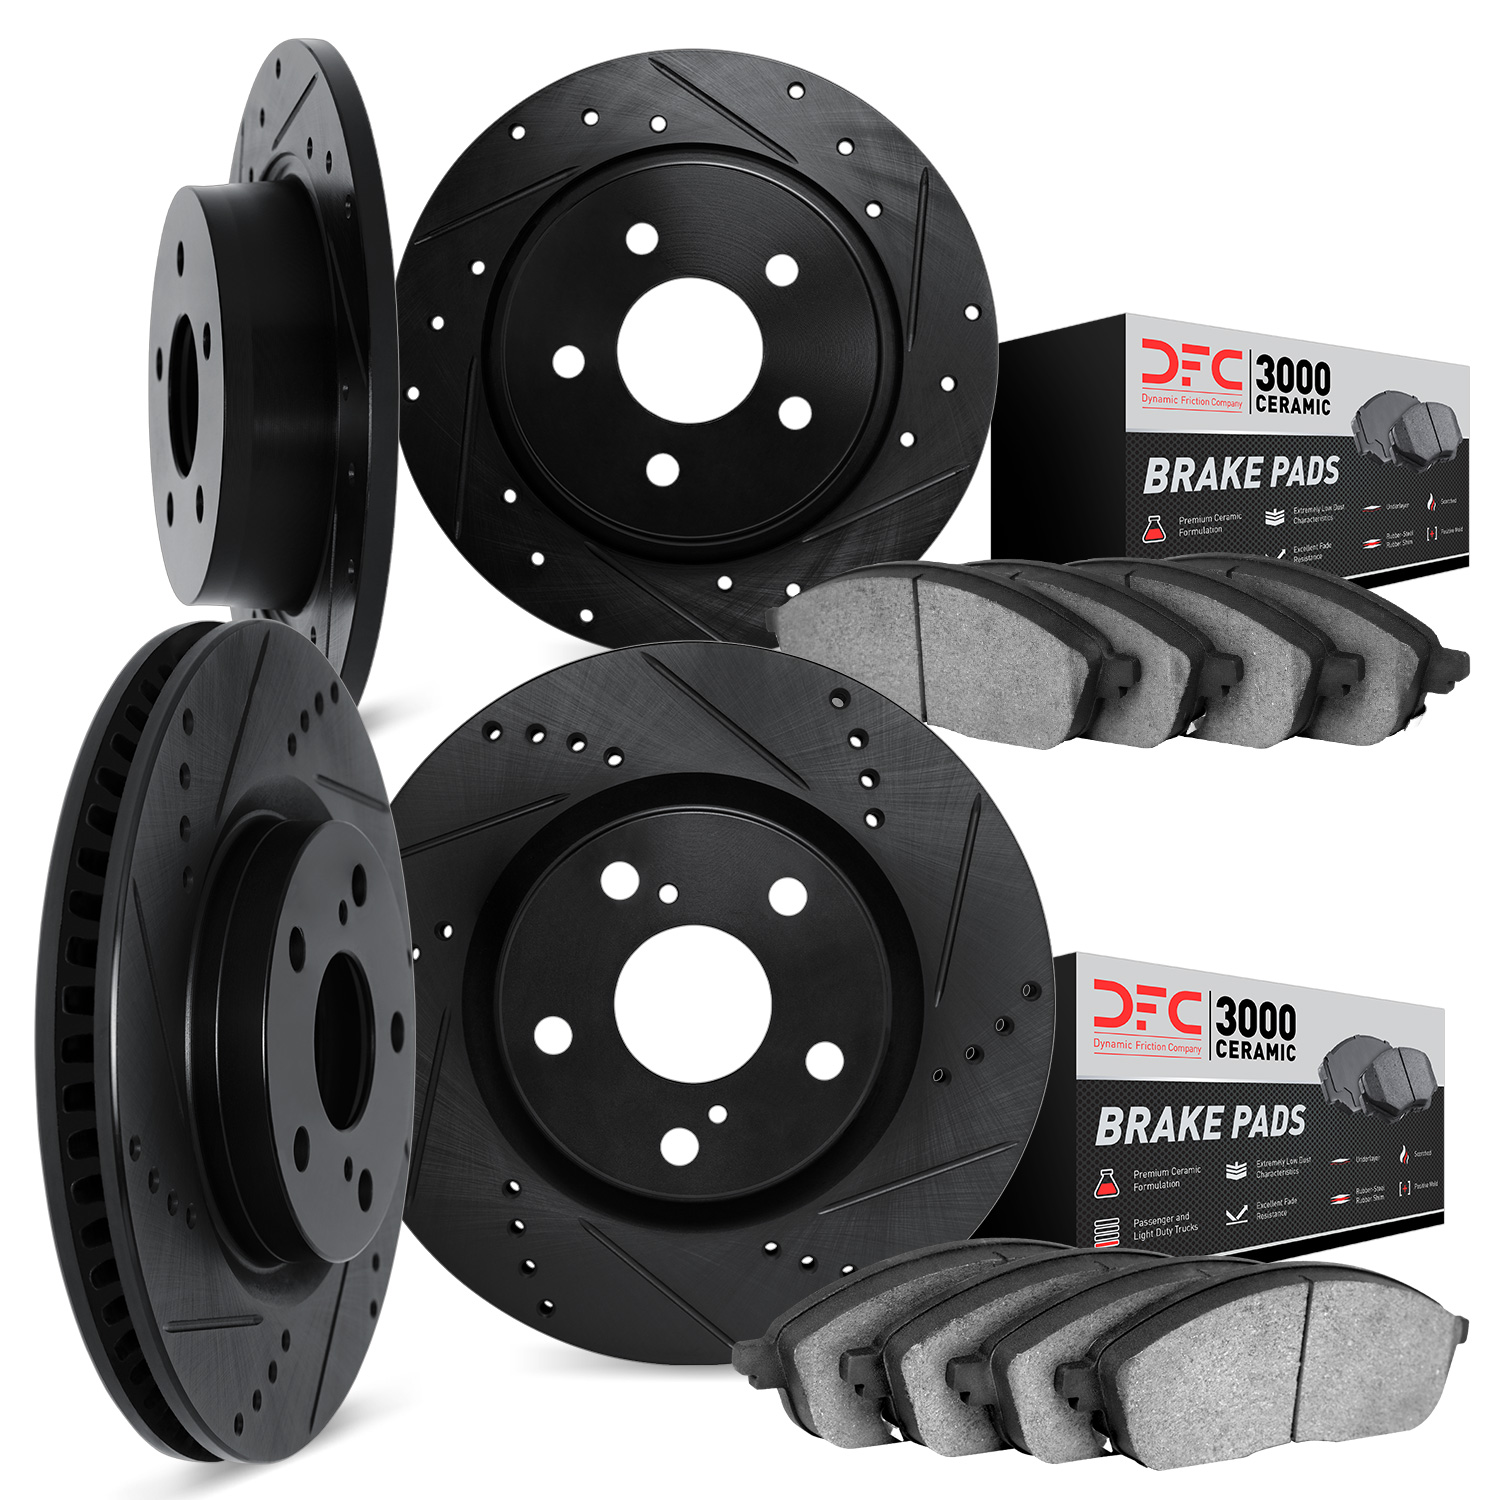 8304-63074 Drilled/Slotted Brake Rotors with 3000-Series Ceramic Brake Pads Kit [Black], 1996-2004 Mercedes-Benz, Position: Fron